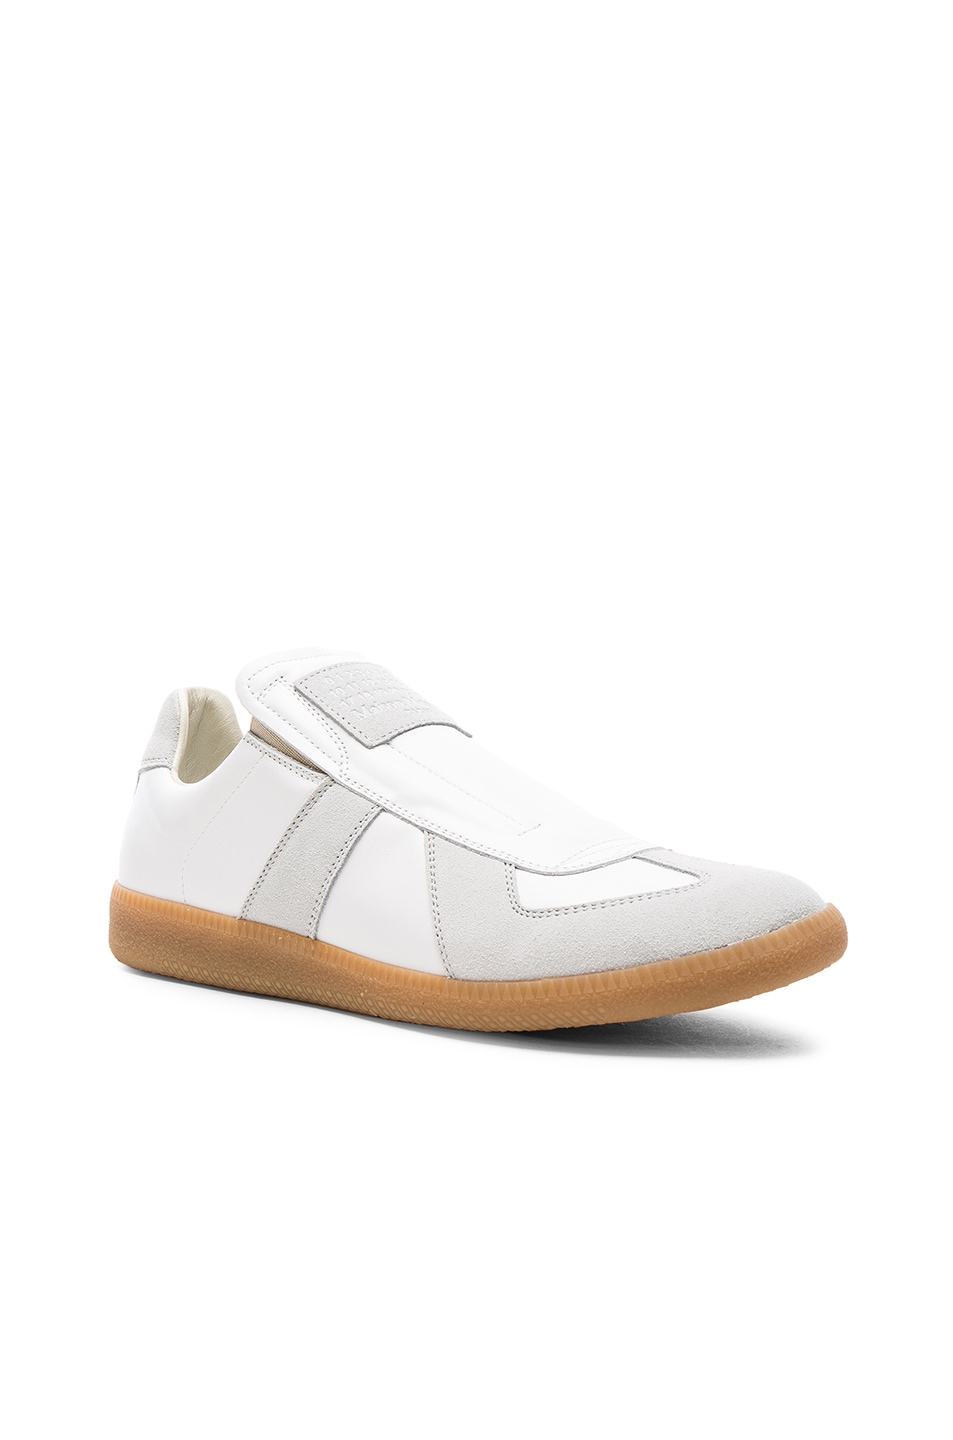 Image 1 of Maison Margiela Calfskin & Suede Replica Slip-ons in White